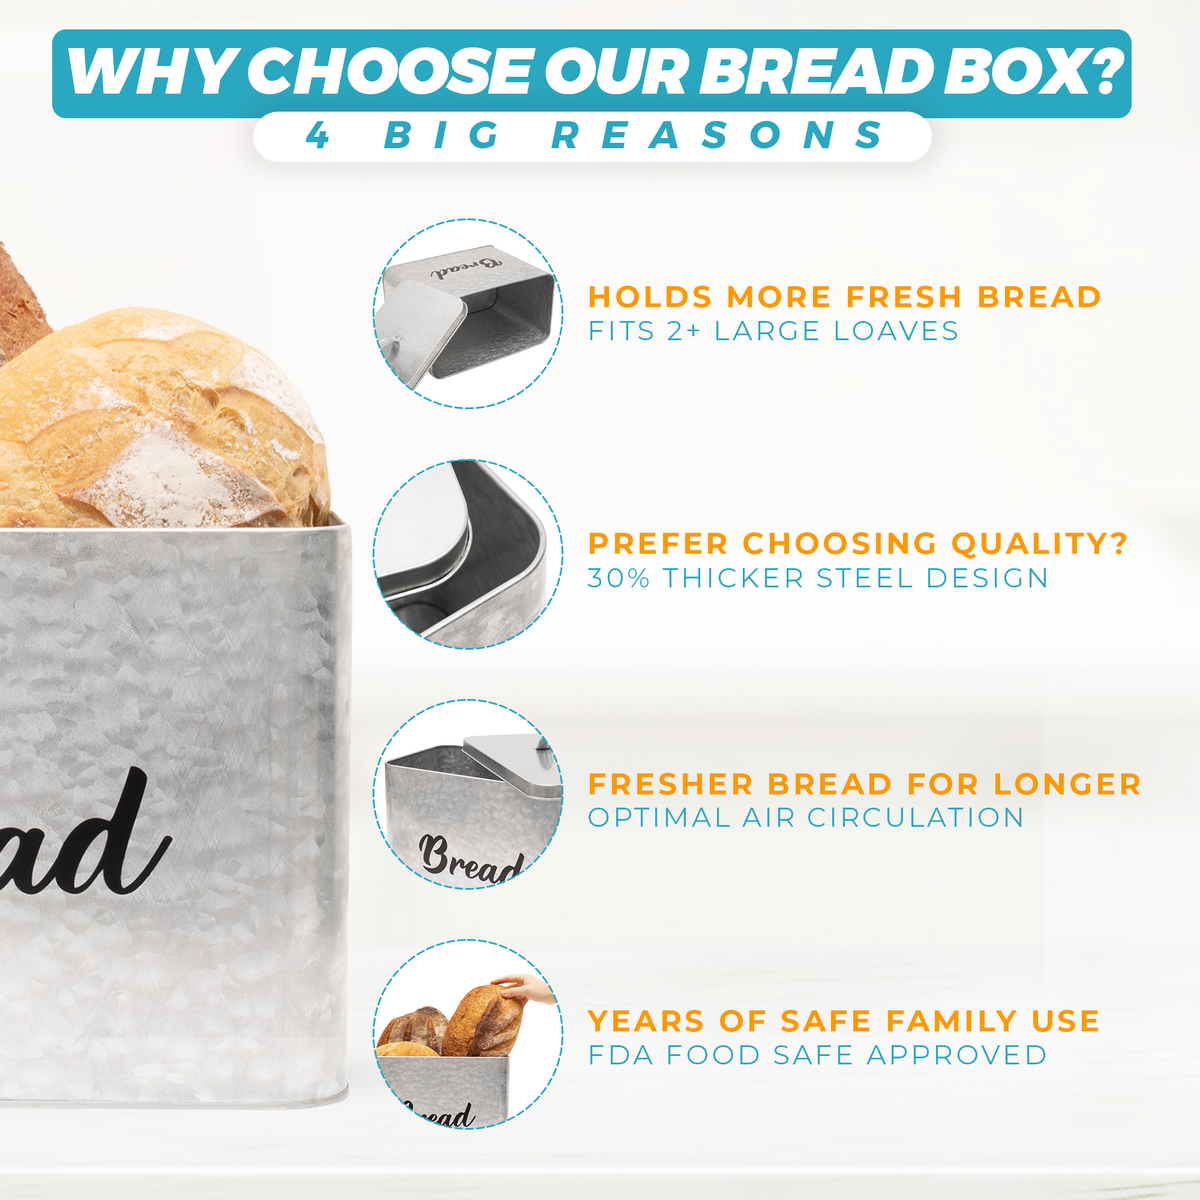 4 Big Reasons why to choose our bread box